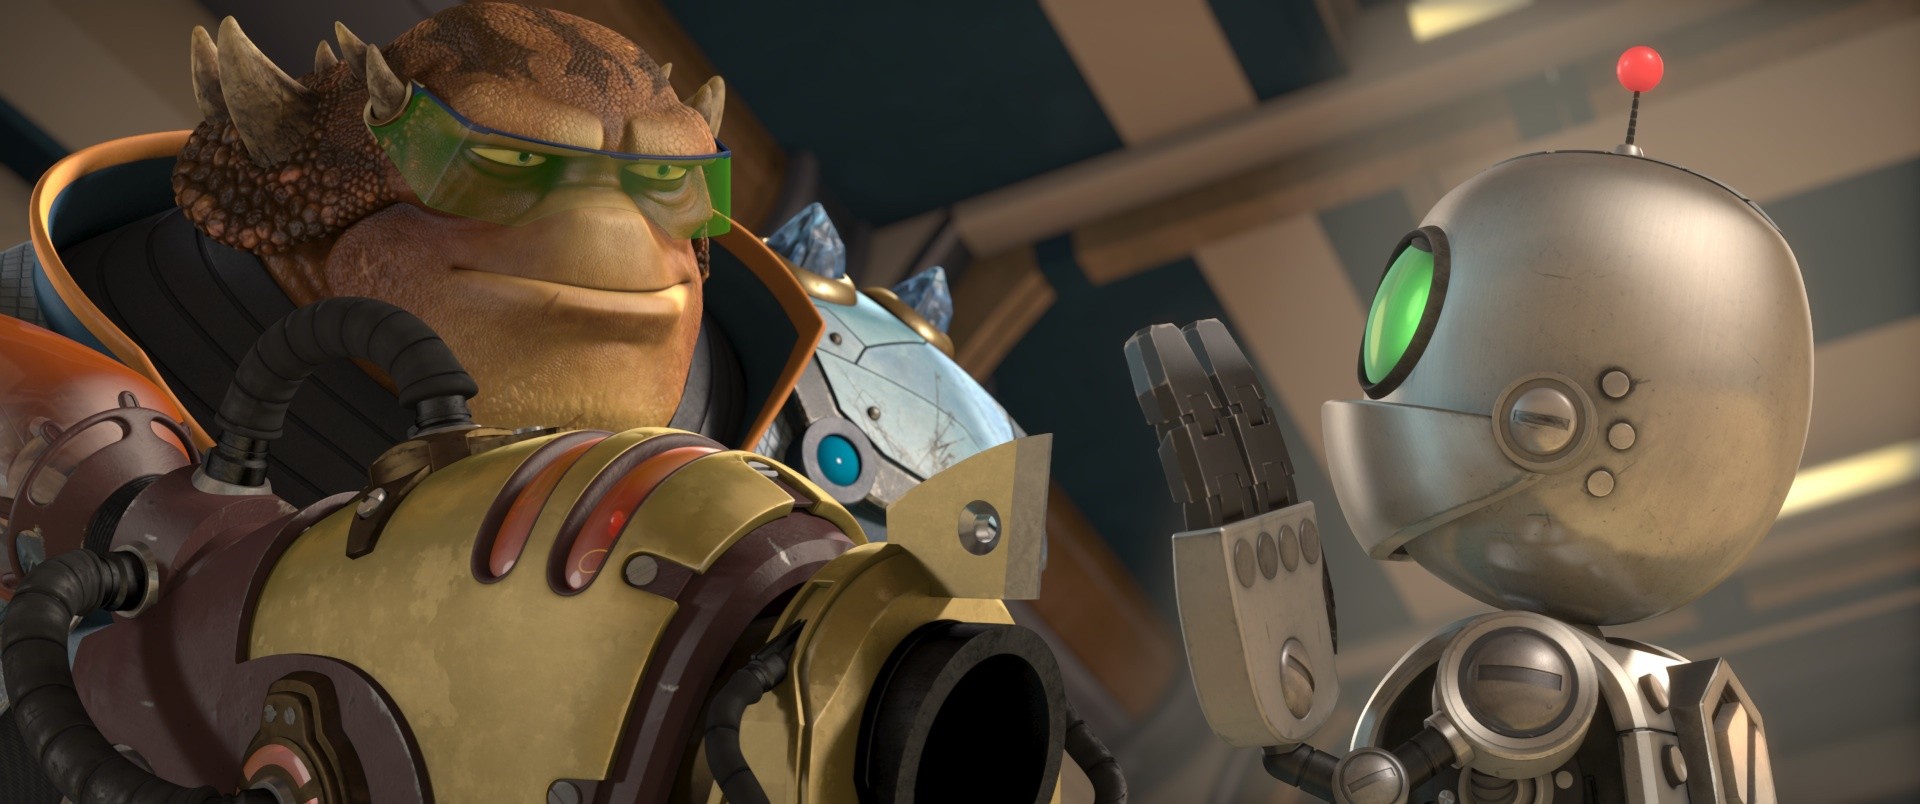 Brax and Clank from Gramercy Pictures' Ratchet & Clank (2016)